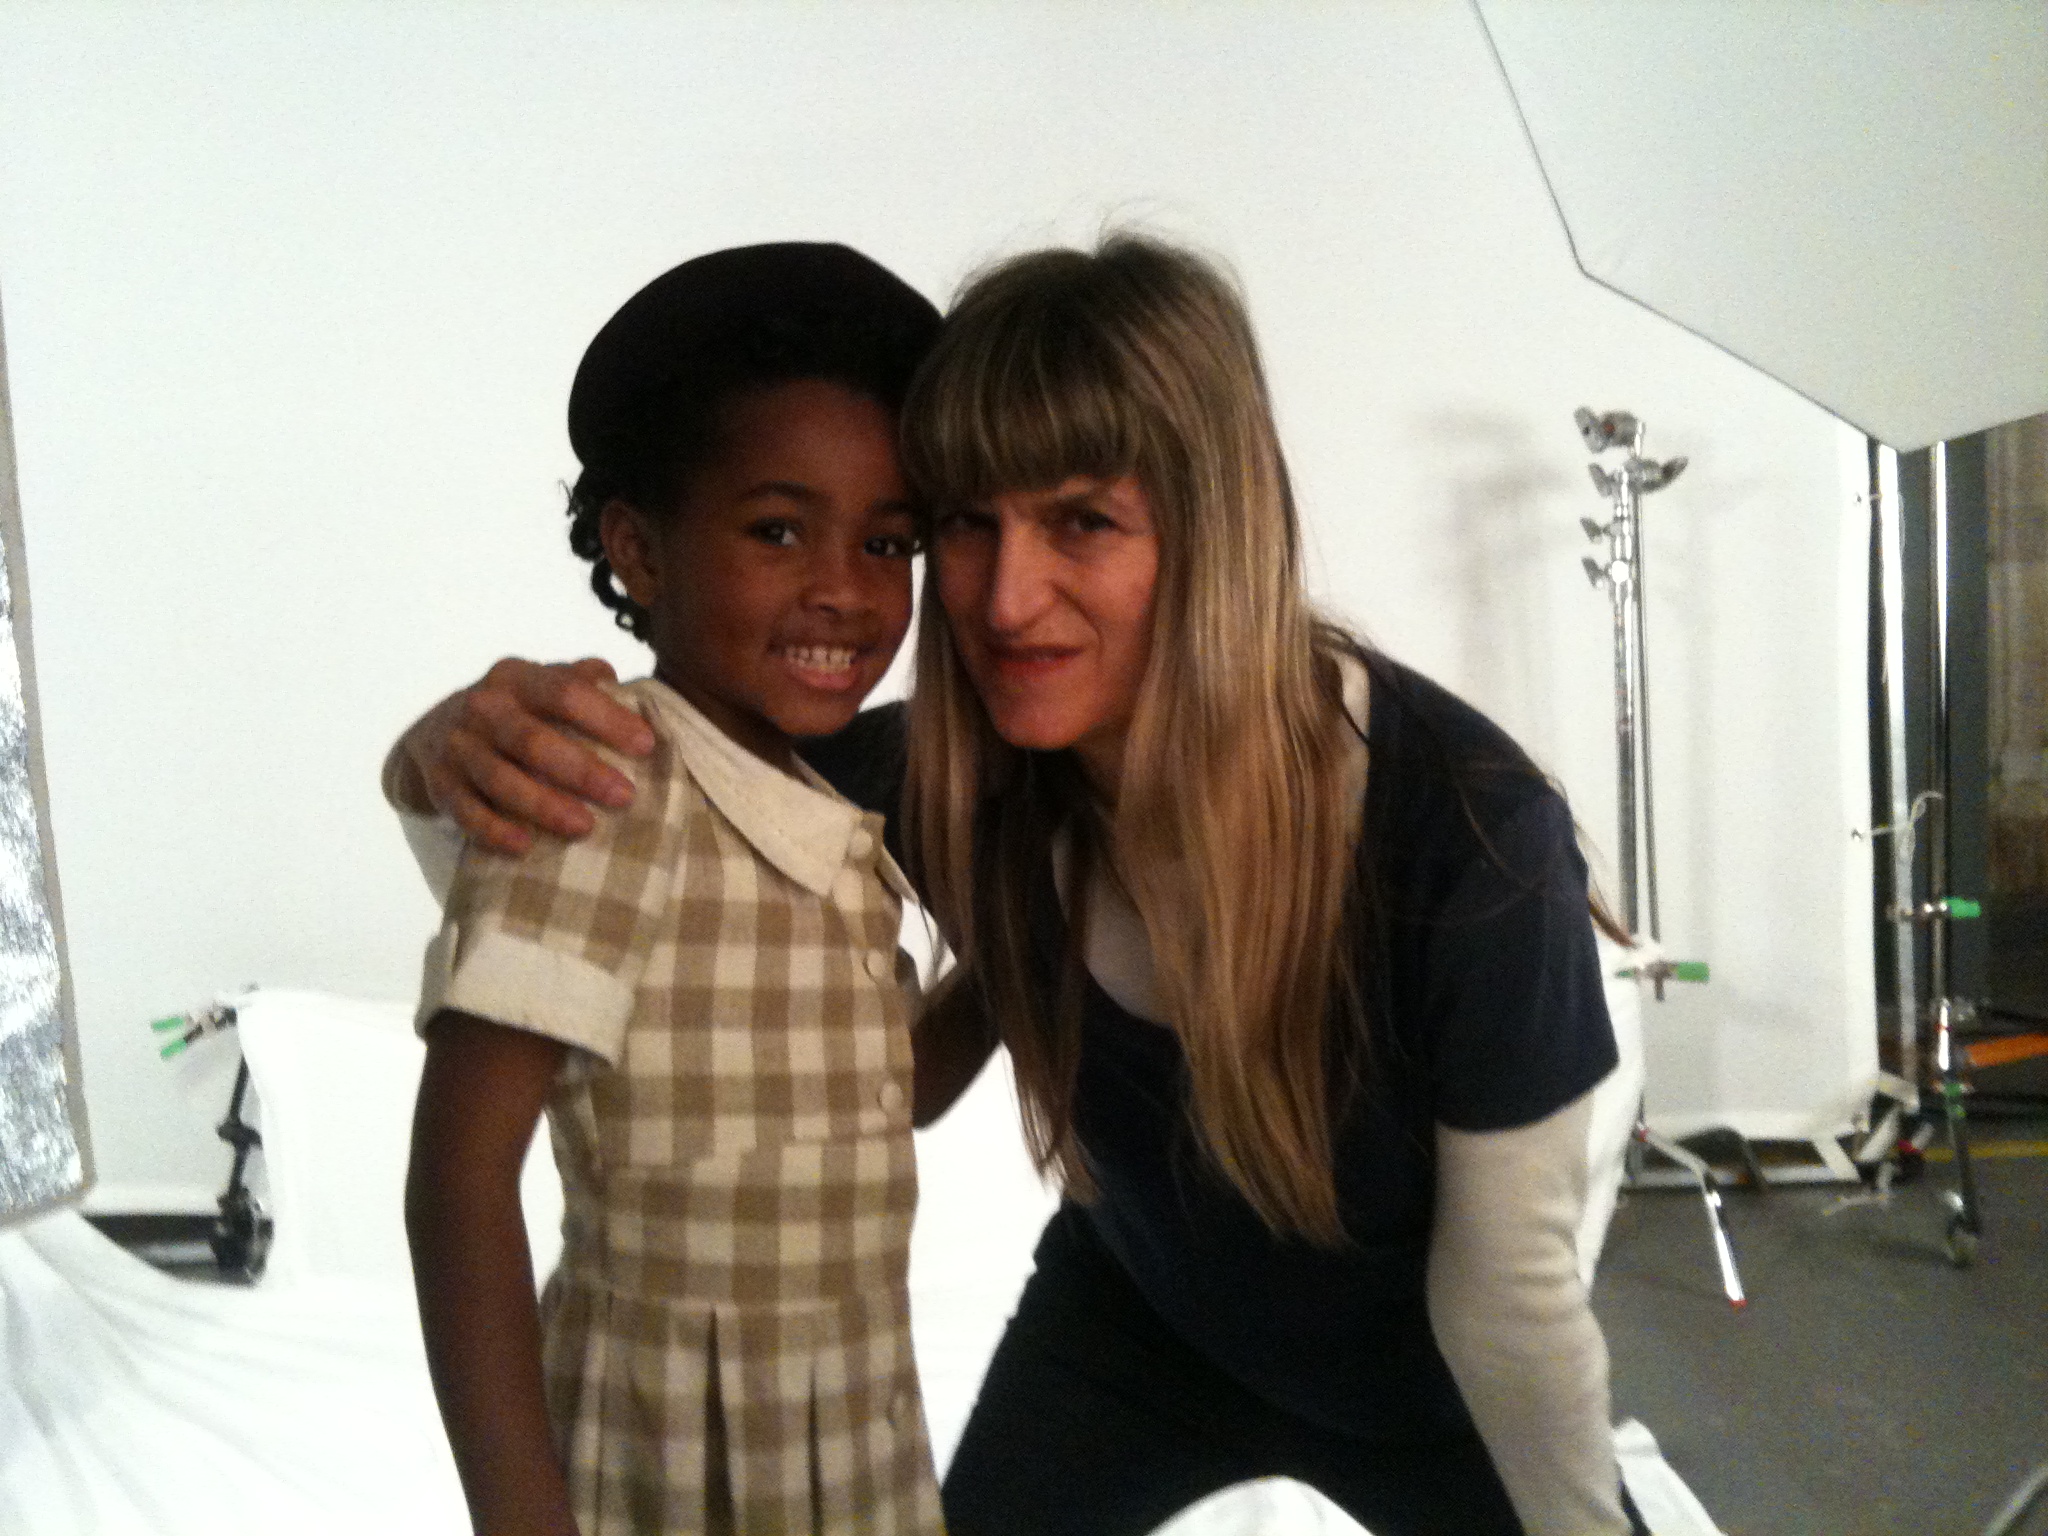 Layla at work with Director Catherine Hardwicke